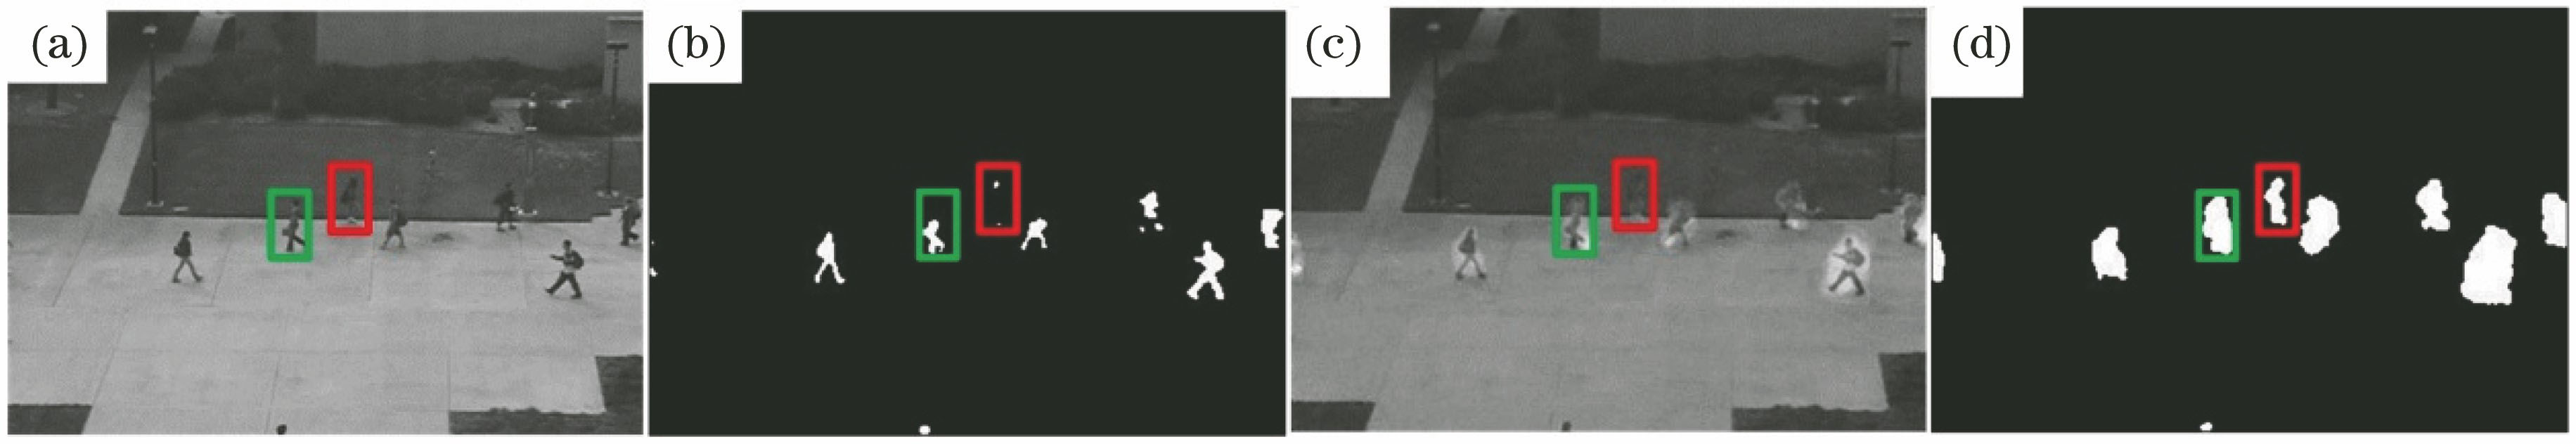 Segmented motion-region images. (a) Original image; (b) motion regions achieved by the ViBE method; (c) image with motion magnitude; (d) motion regions achieved by the proposed algorithm